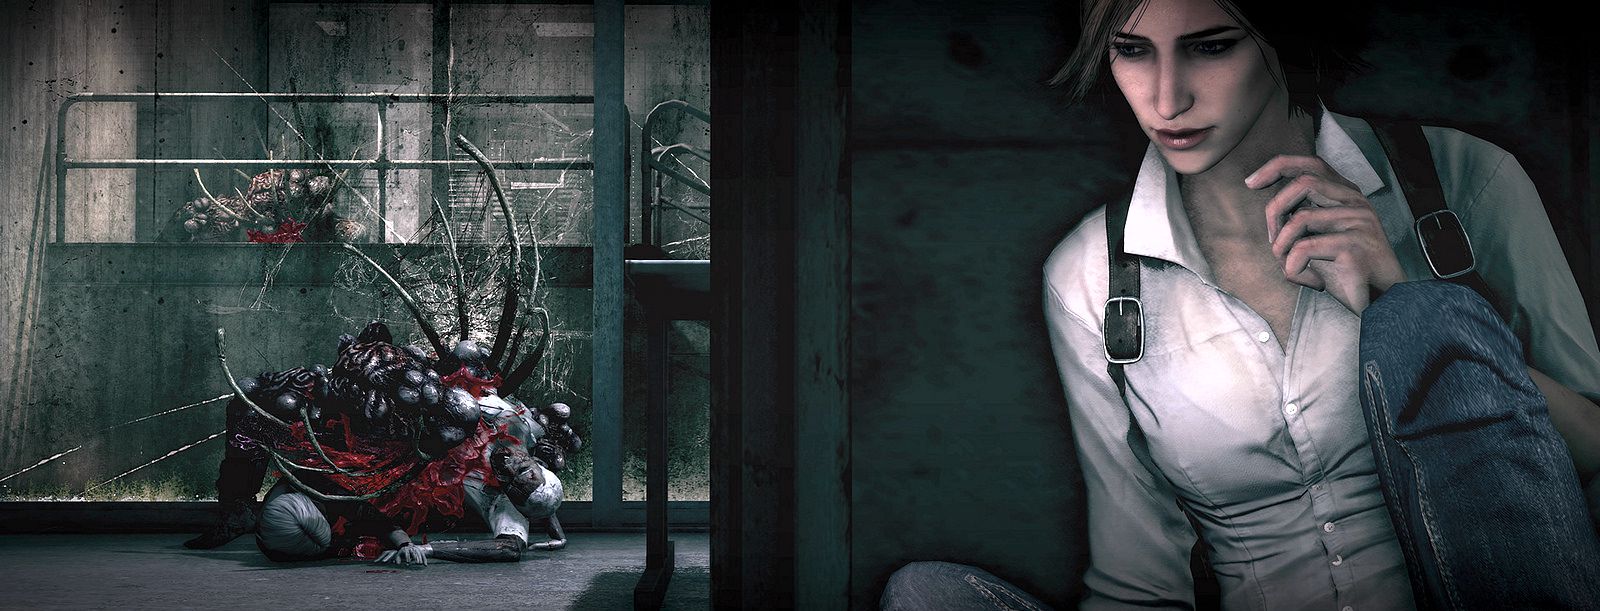 IM1283: The Evil Within - The Assignment & The Consequence